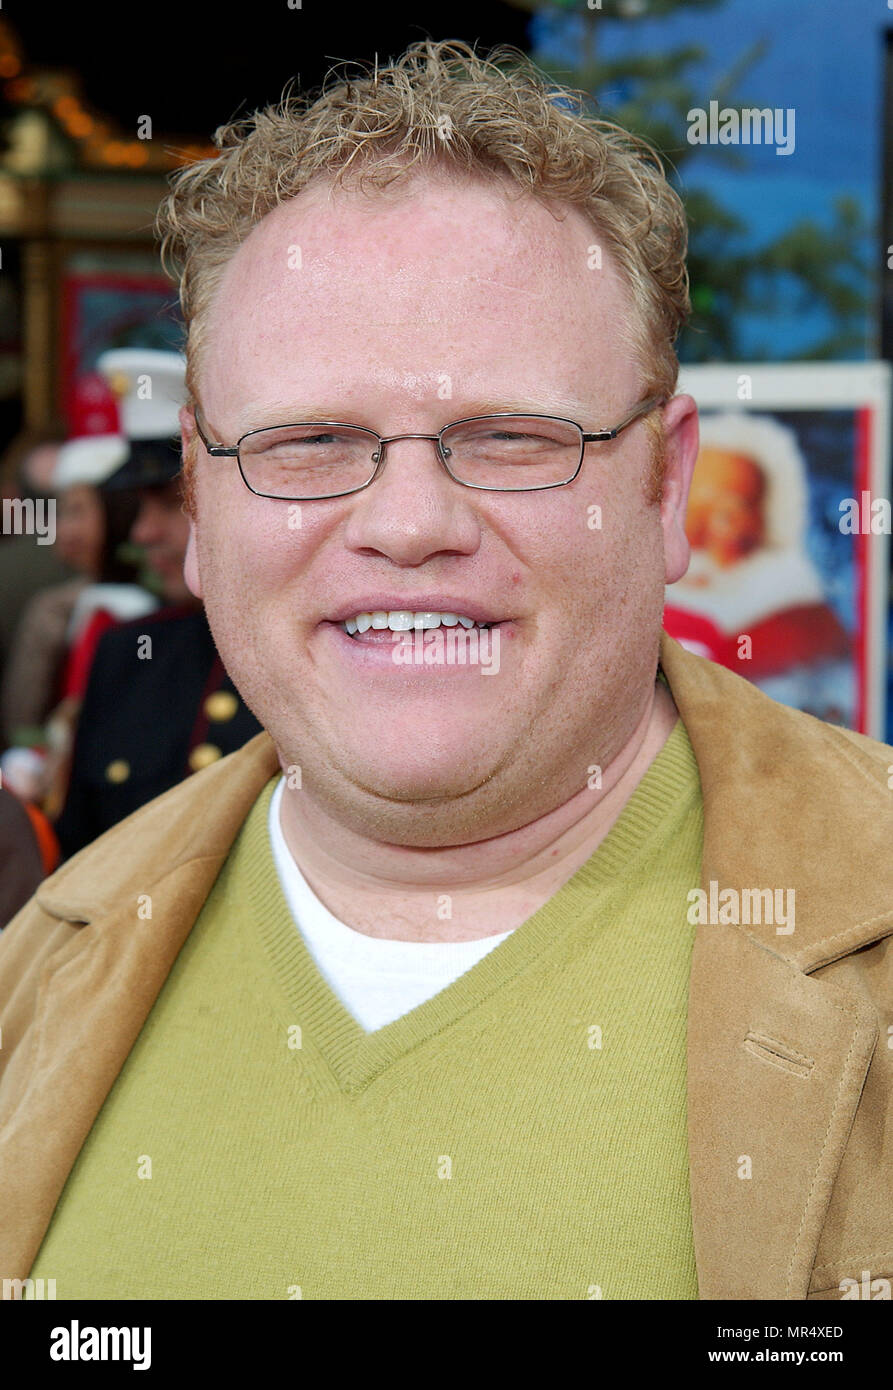 Larry Joe Campbell arriving at the Santa Clause 2 premiere at the El Captain Theatre in Los Angeles. October 27, 2002. CampbellLarryJoe253 Red Carpet Event, Vertical, USA, Film Industry, Celebrities,  Photography, Bestof, Arts Culture and Entertainment, Topix Celebrities fashion /  Vertical, Best of, Event in Hollywood Life - California,  Red Carpet and backstage, USA, Film Industry, Celebrities,  movie celebrities, TV celebrities, Music celebrities, Photography, Bestof, Arts Culture and Entertainment,  Topix, headshot, vertical, one person,, from the year , 2002, inquiry tsuni@Gamma-USA.com Stock Photo